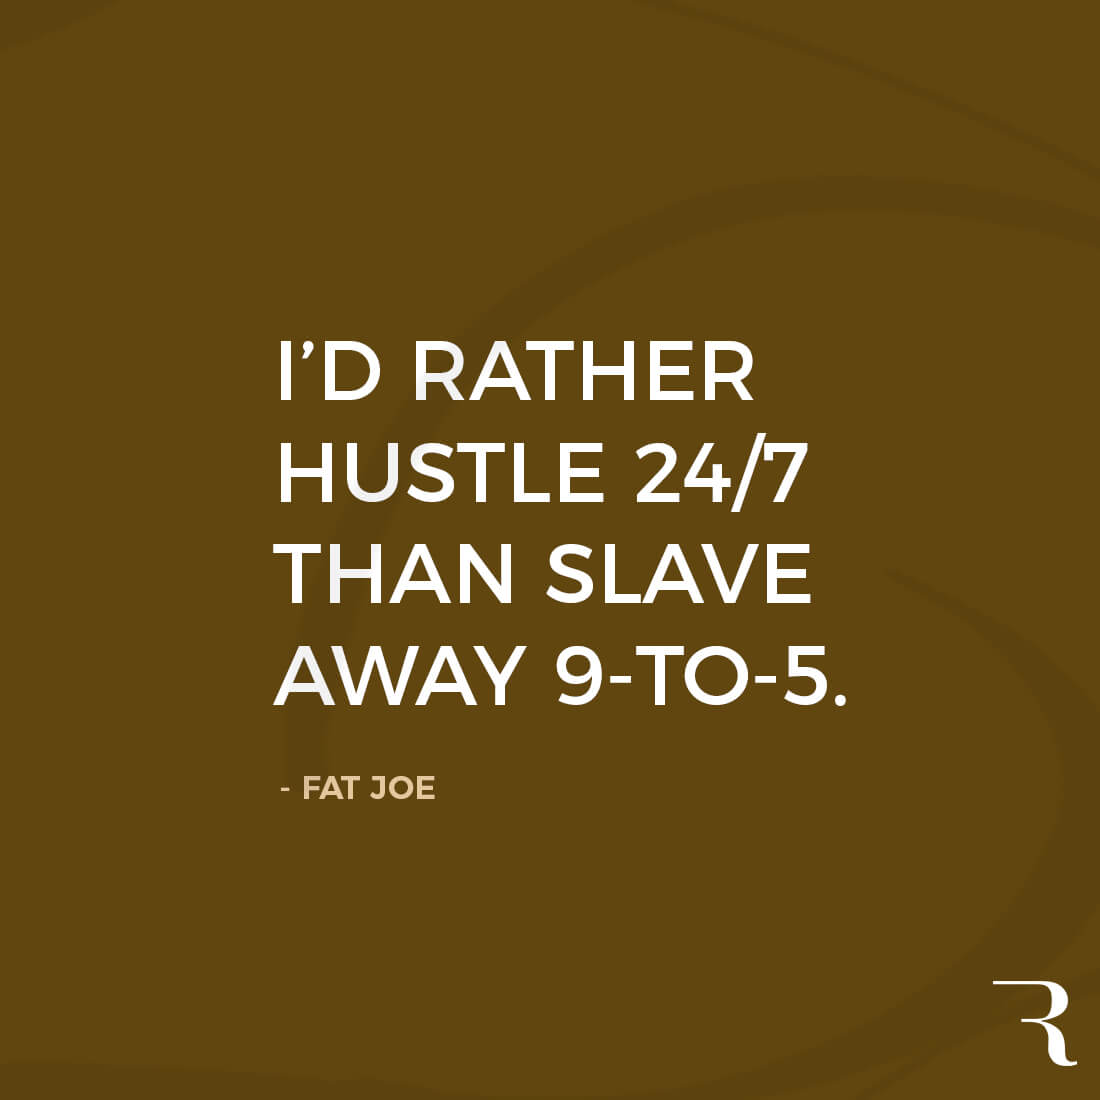 Motivational Quotes: "I'd rather hustle 24/7 than slave away 9-to-5." 112 Motivational Quotes to Be a Better Entrepreneur